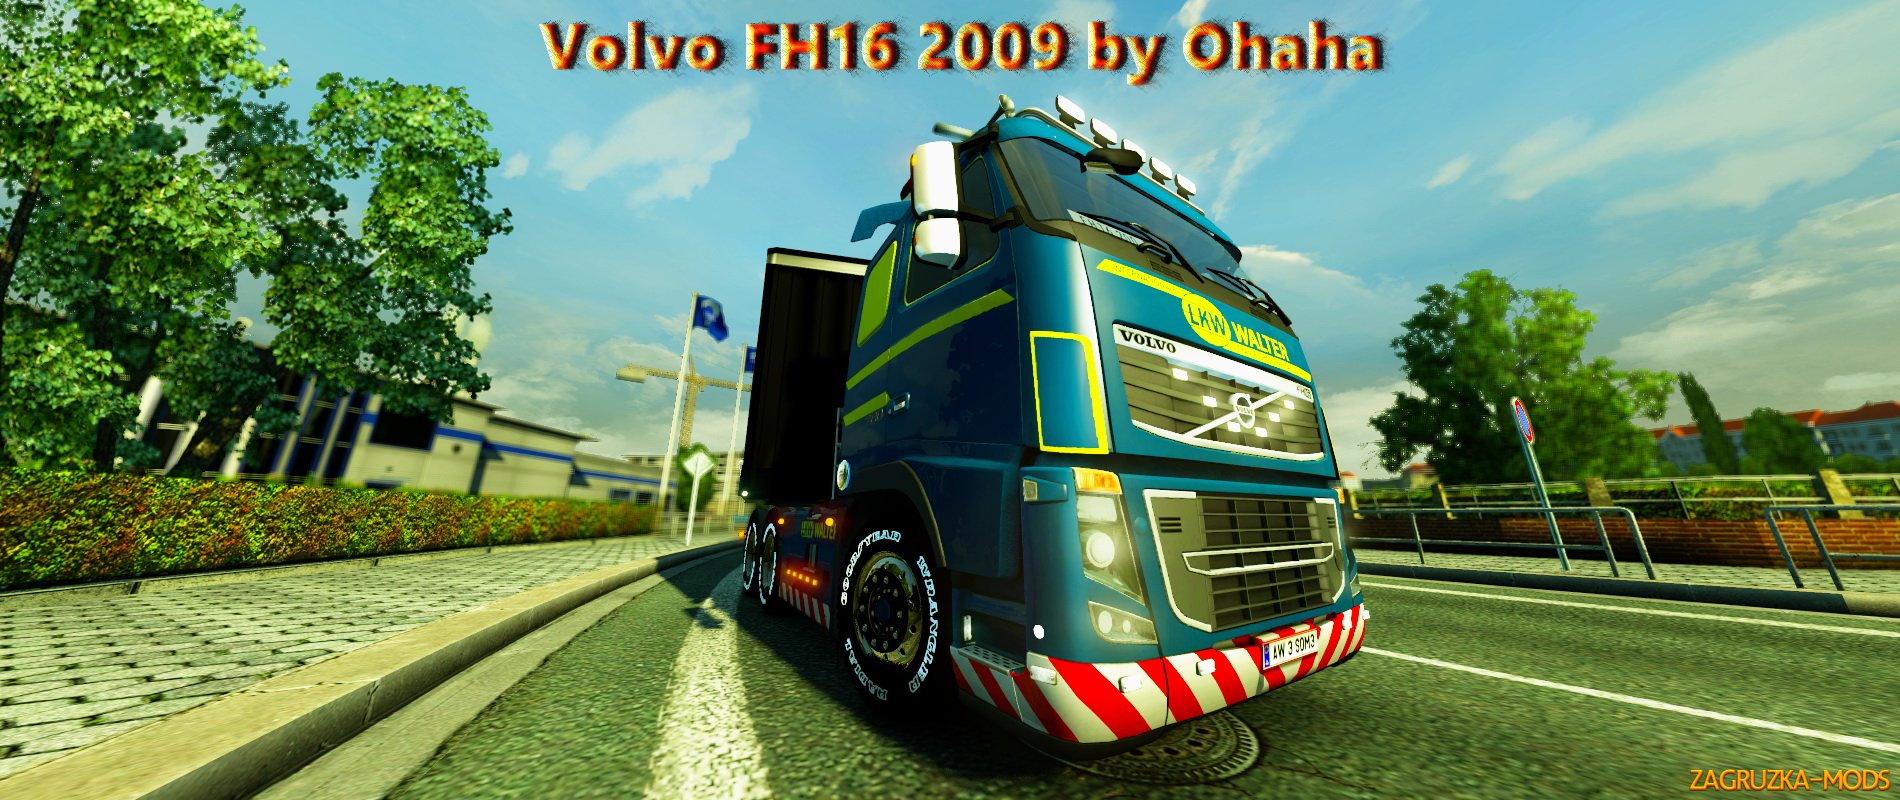 Volvo FH16 2009 v17.0s by Ohaha for ETS 2